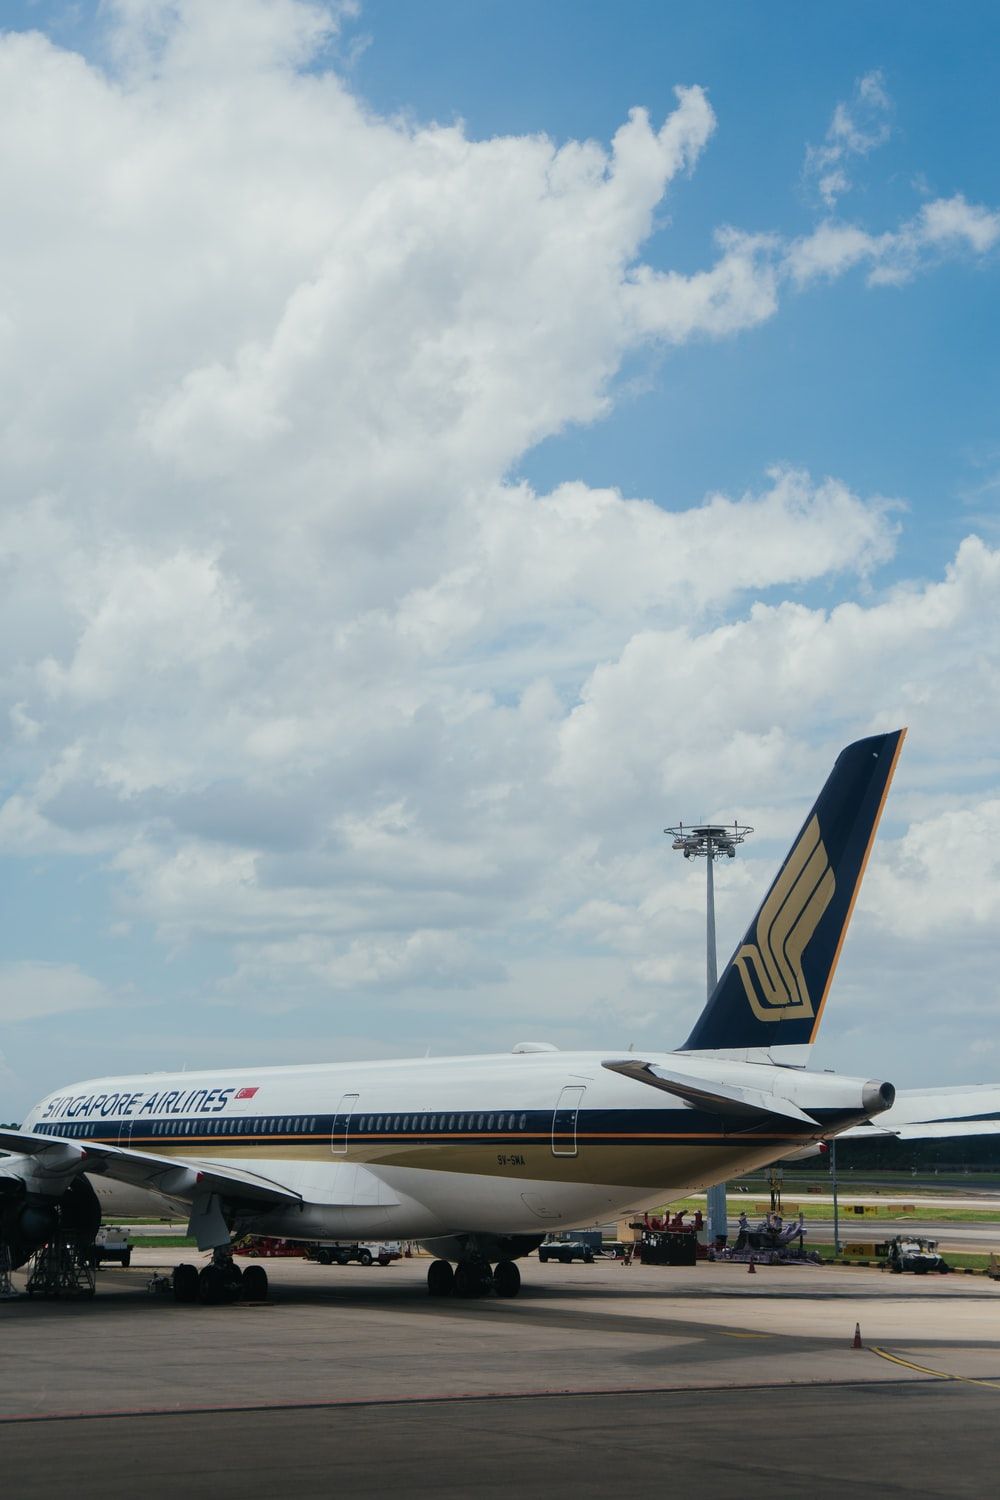 Singapore Airline Picture. Download Free Image